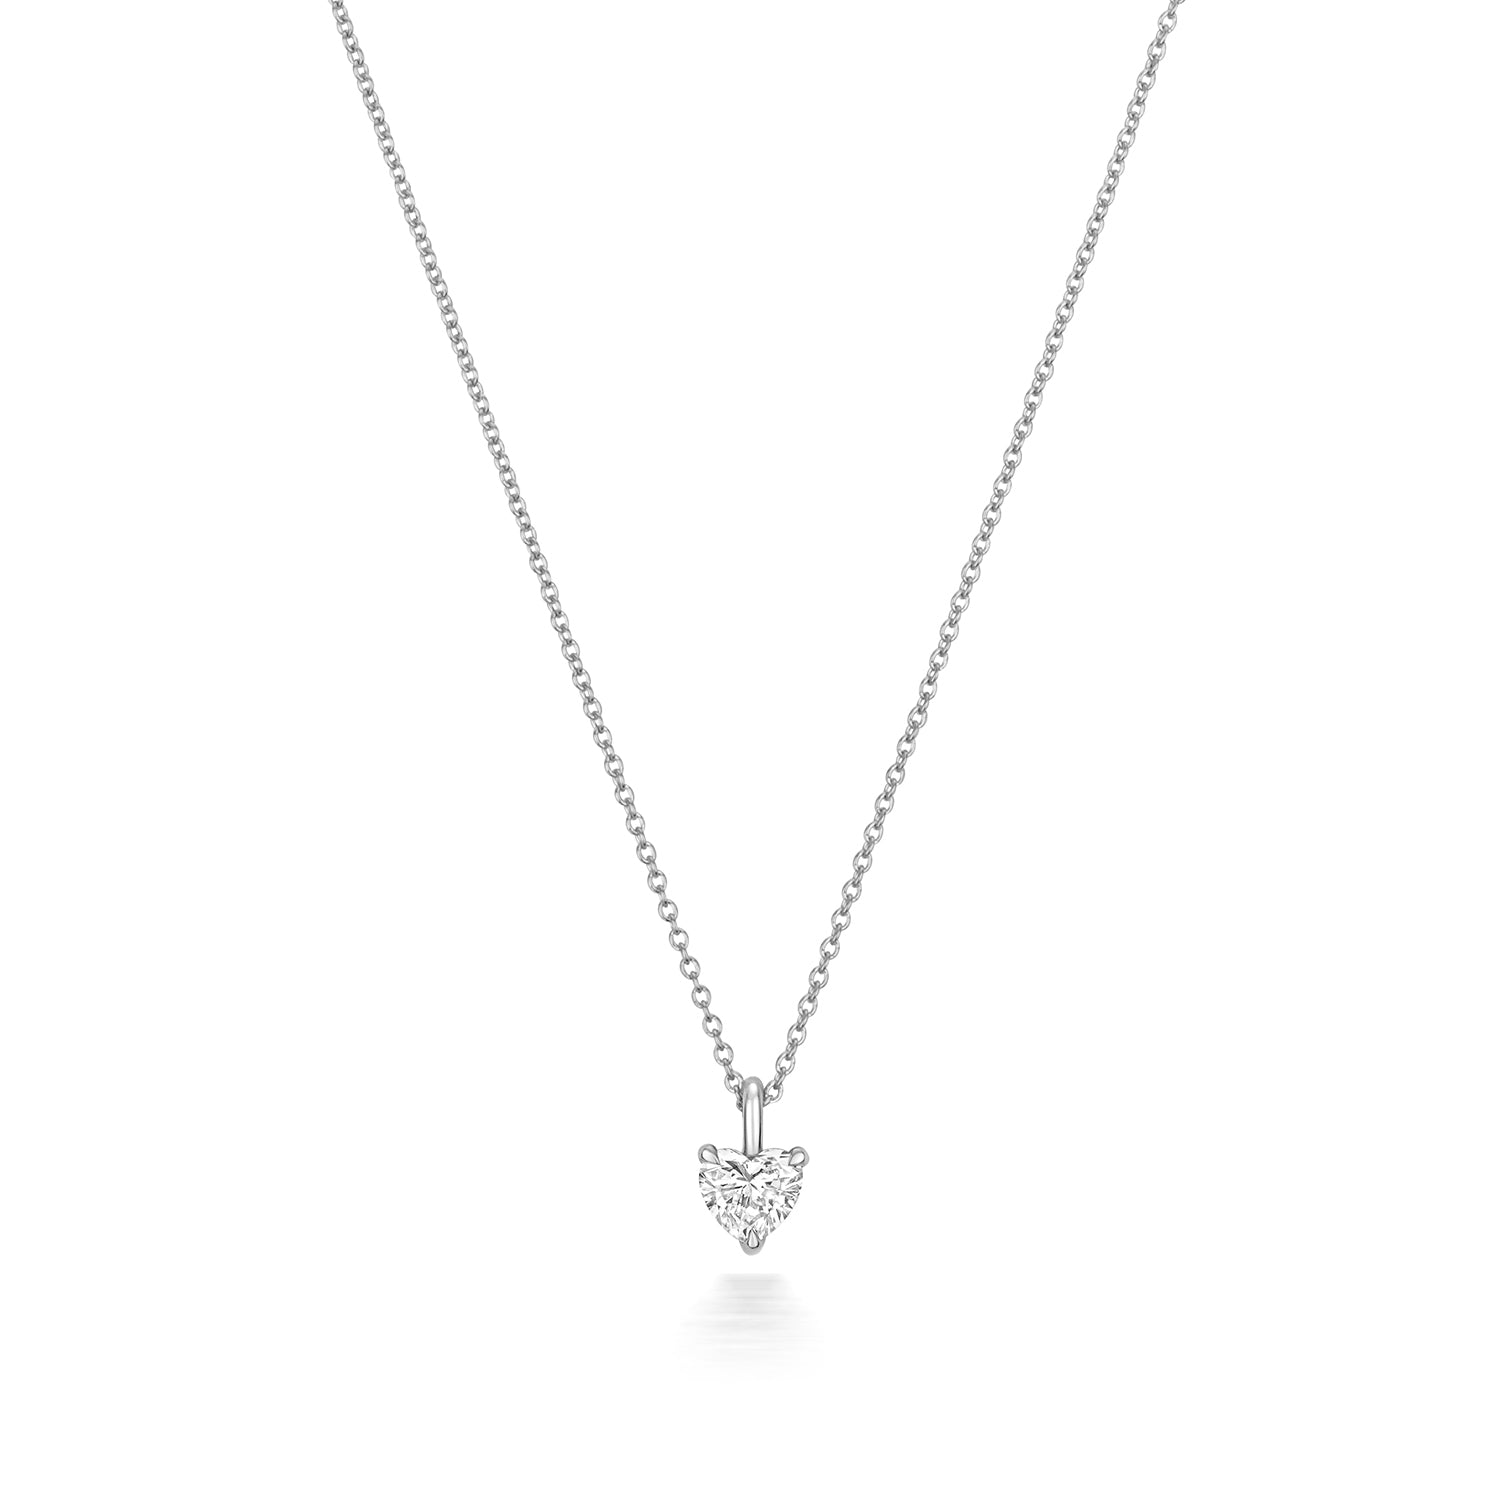 DIAMOND HEART SHAPE NECKLACE IN 18CT WHITE GOLD